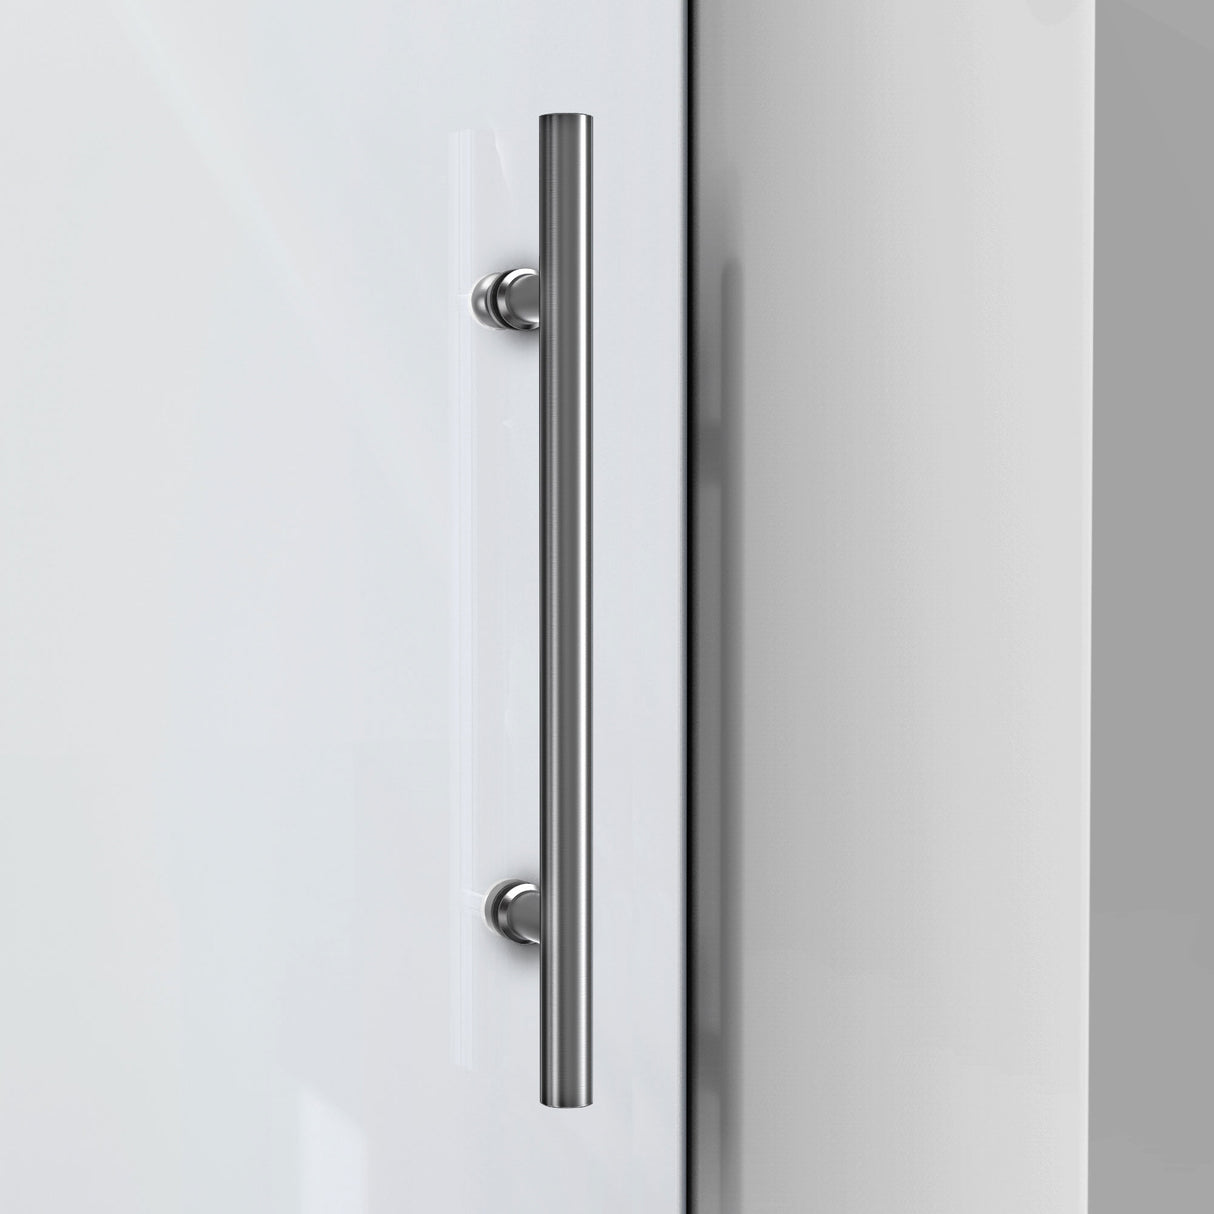 DreamLine Enigma-X 44-48 in. W x 76 in. H Clear Sliding Shower Door in Brushed Stainless Steel